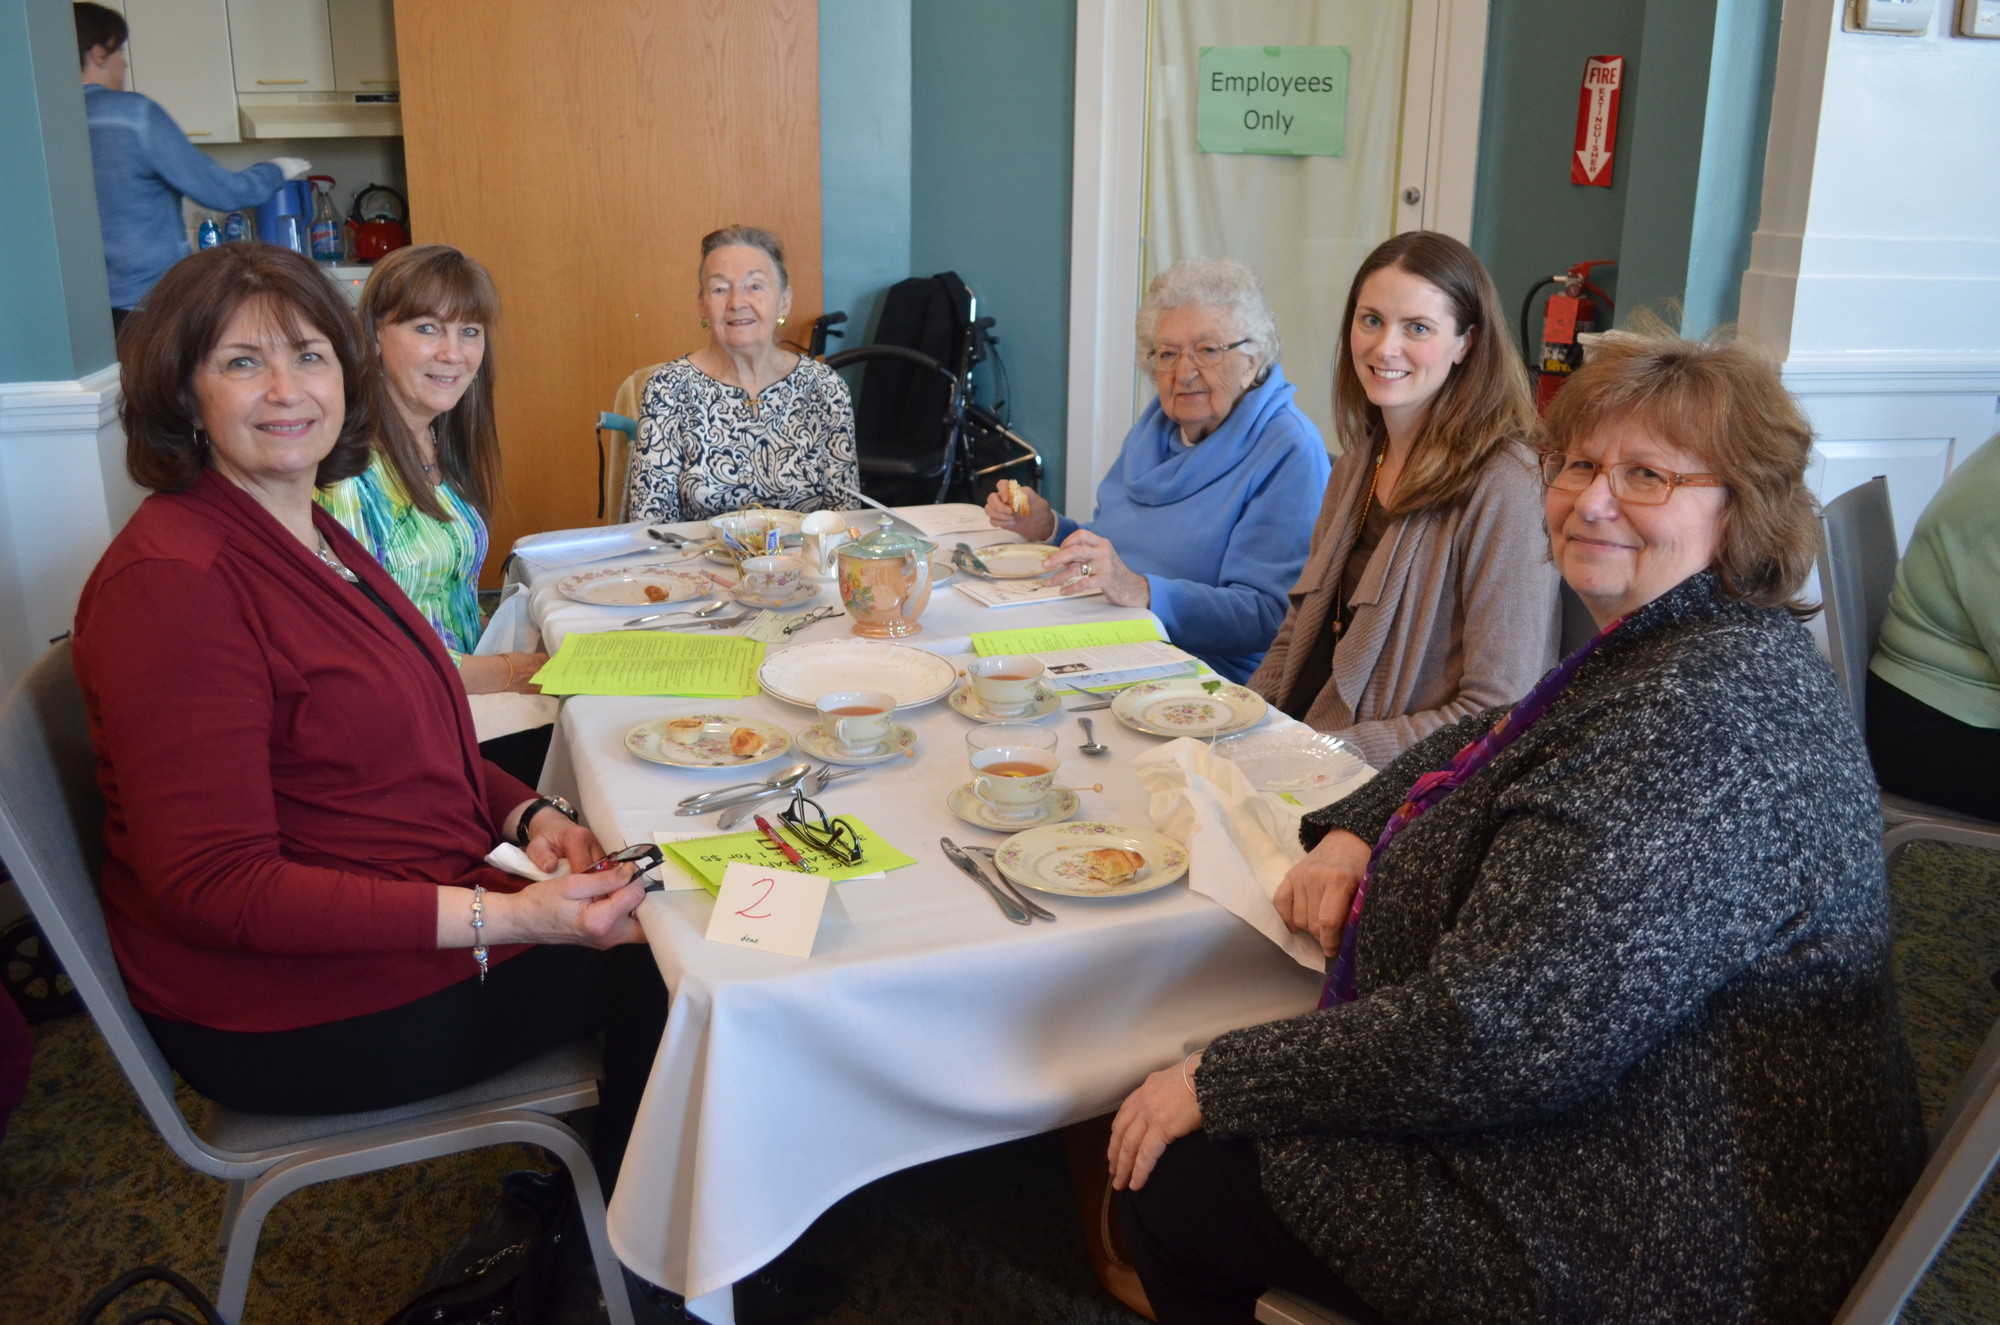 Jery Charles, left, Marjorie Monahan, Sheila Stone, Marie Blanda, Elizabeth Wolk, Debbie VanCura shared a table and awaited the delicious fare.